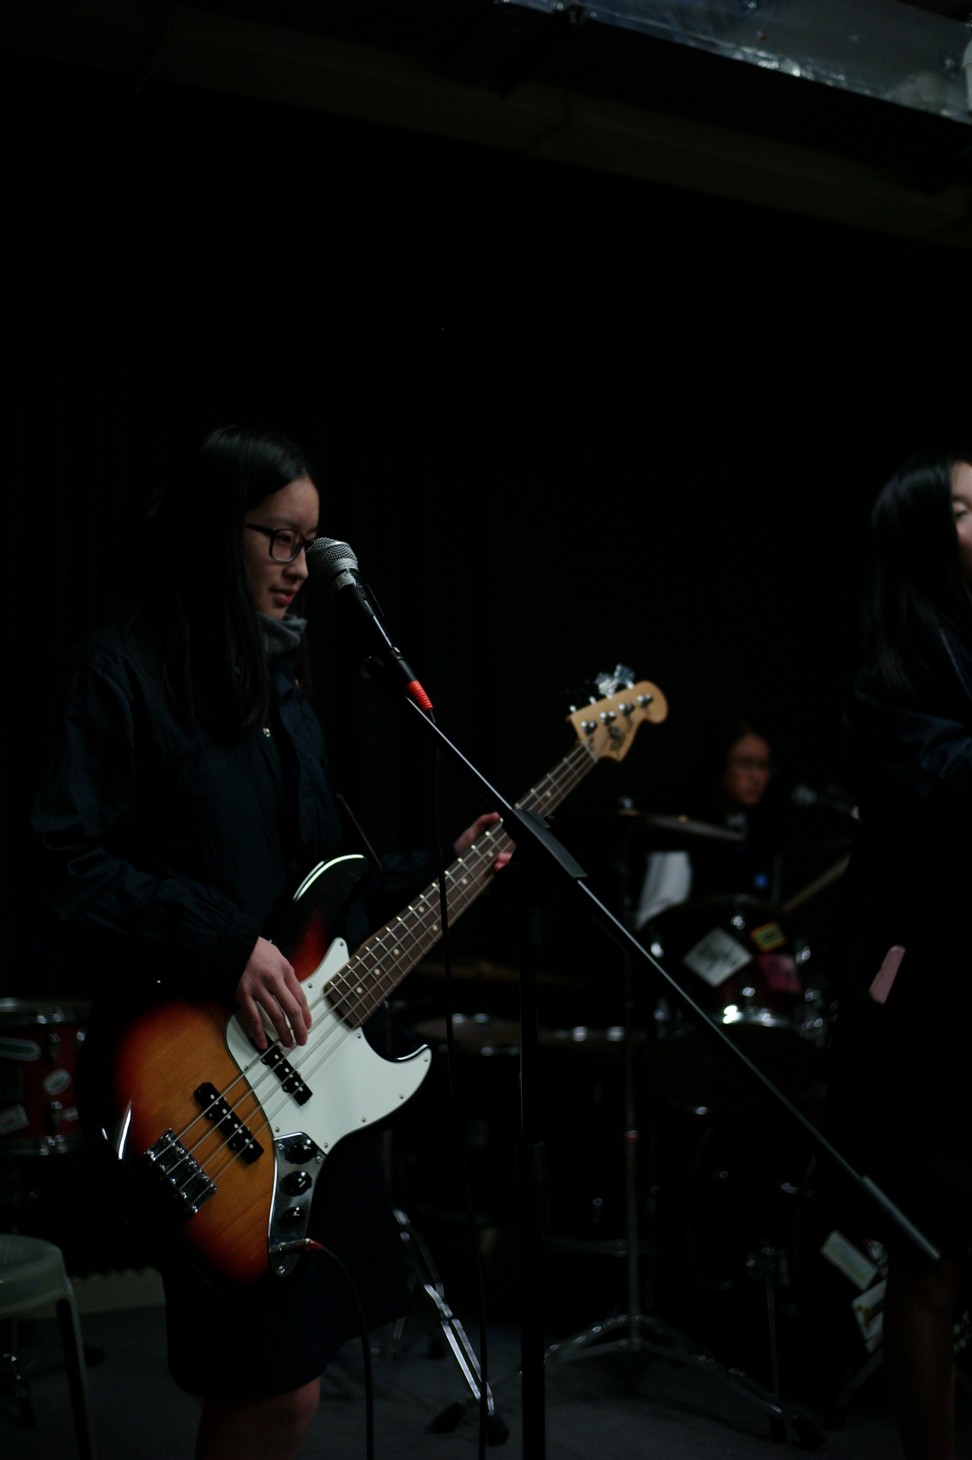 Candy Lau on bass.